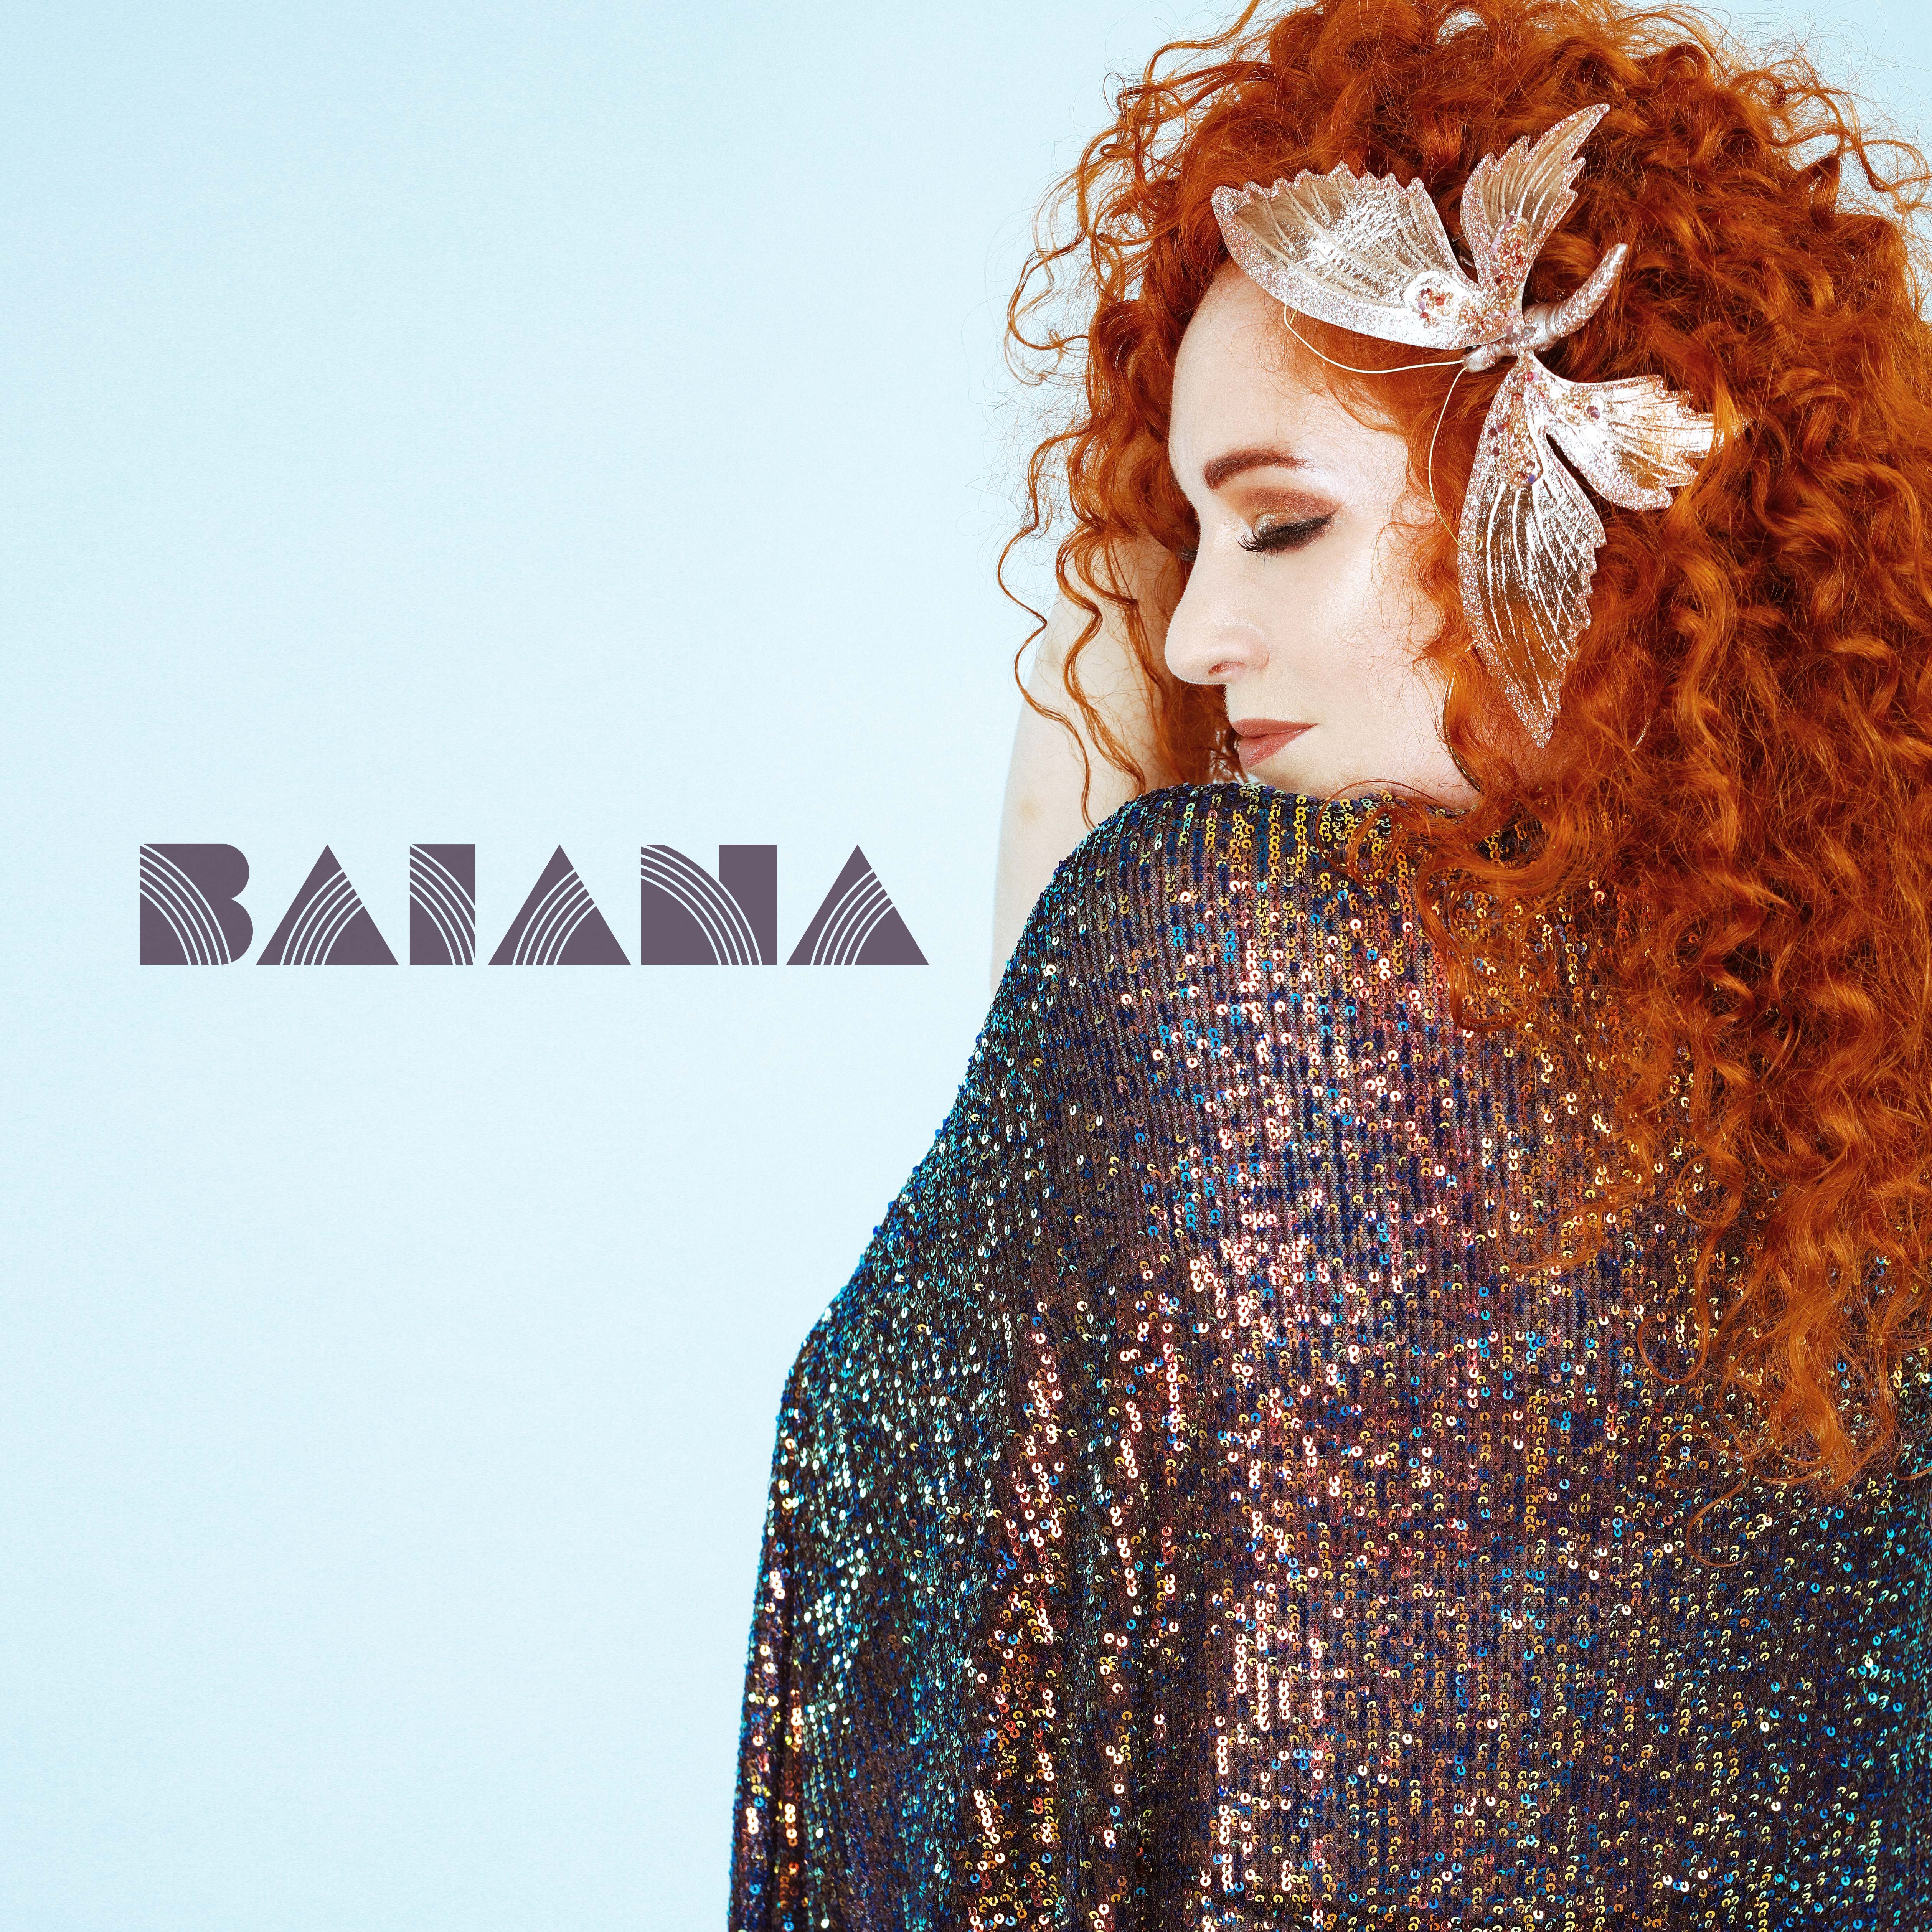 Laura Doyle's album cover with a light blue background, the word Baiana and Laura to the left of the frame